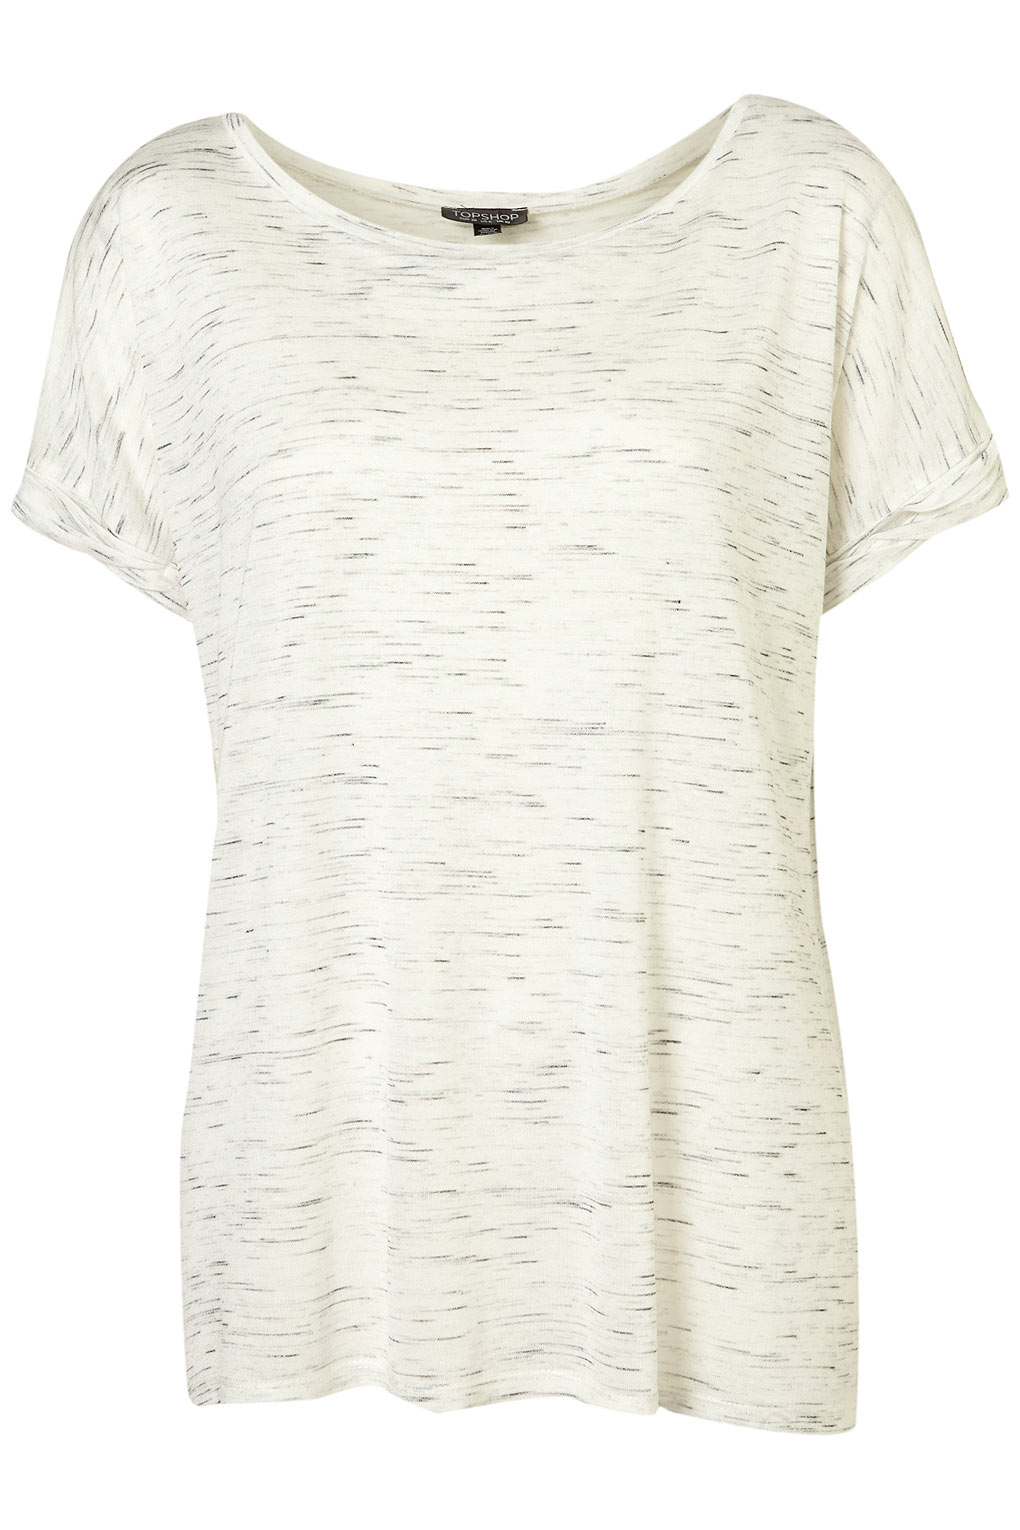 Lyst - Topshop Fleck T-shirt in White